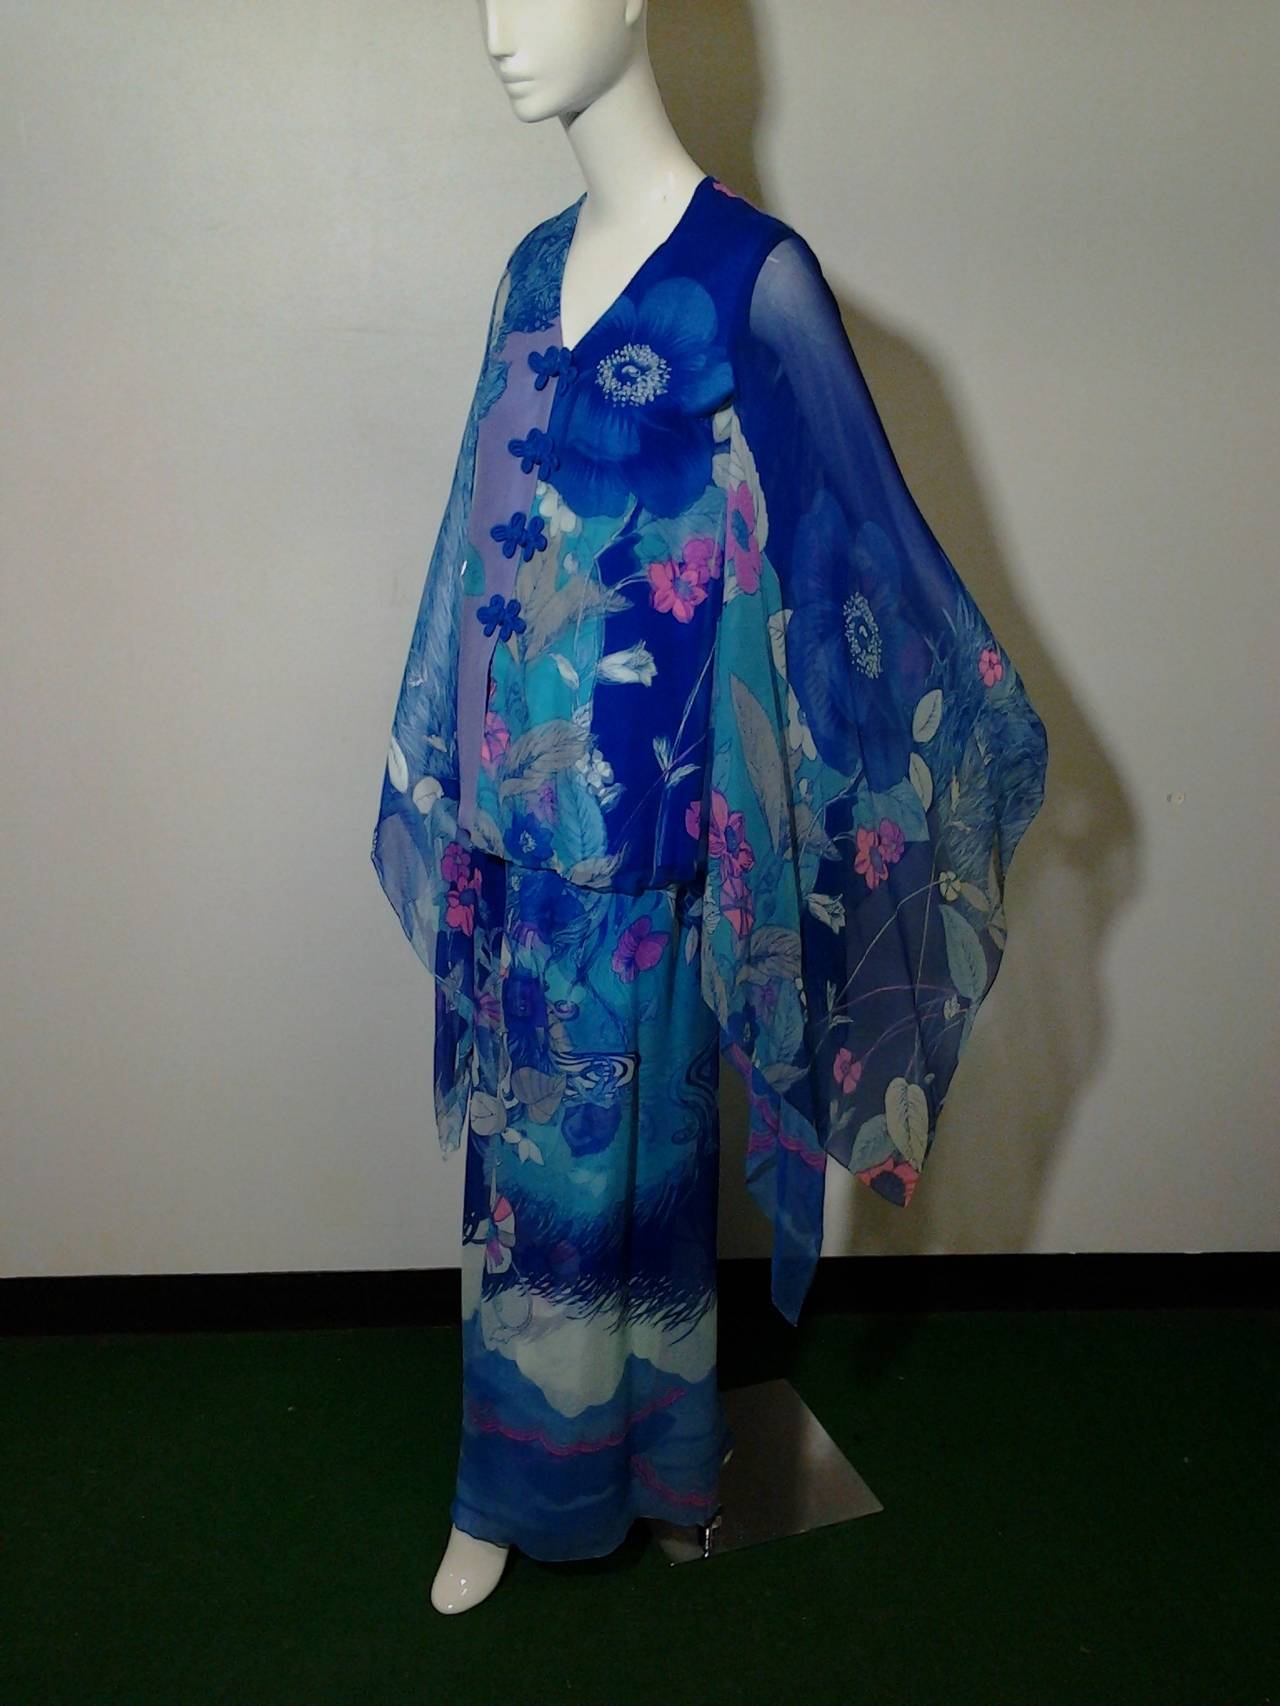 This evening ensemble is an early example of Hanae Mori's work. Here she uses two types of fabric printed with the same motif to create a shadow effect. The cape sleeves are reminiscent of the extended sleeves of the furisode, a formal kimono style